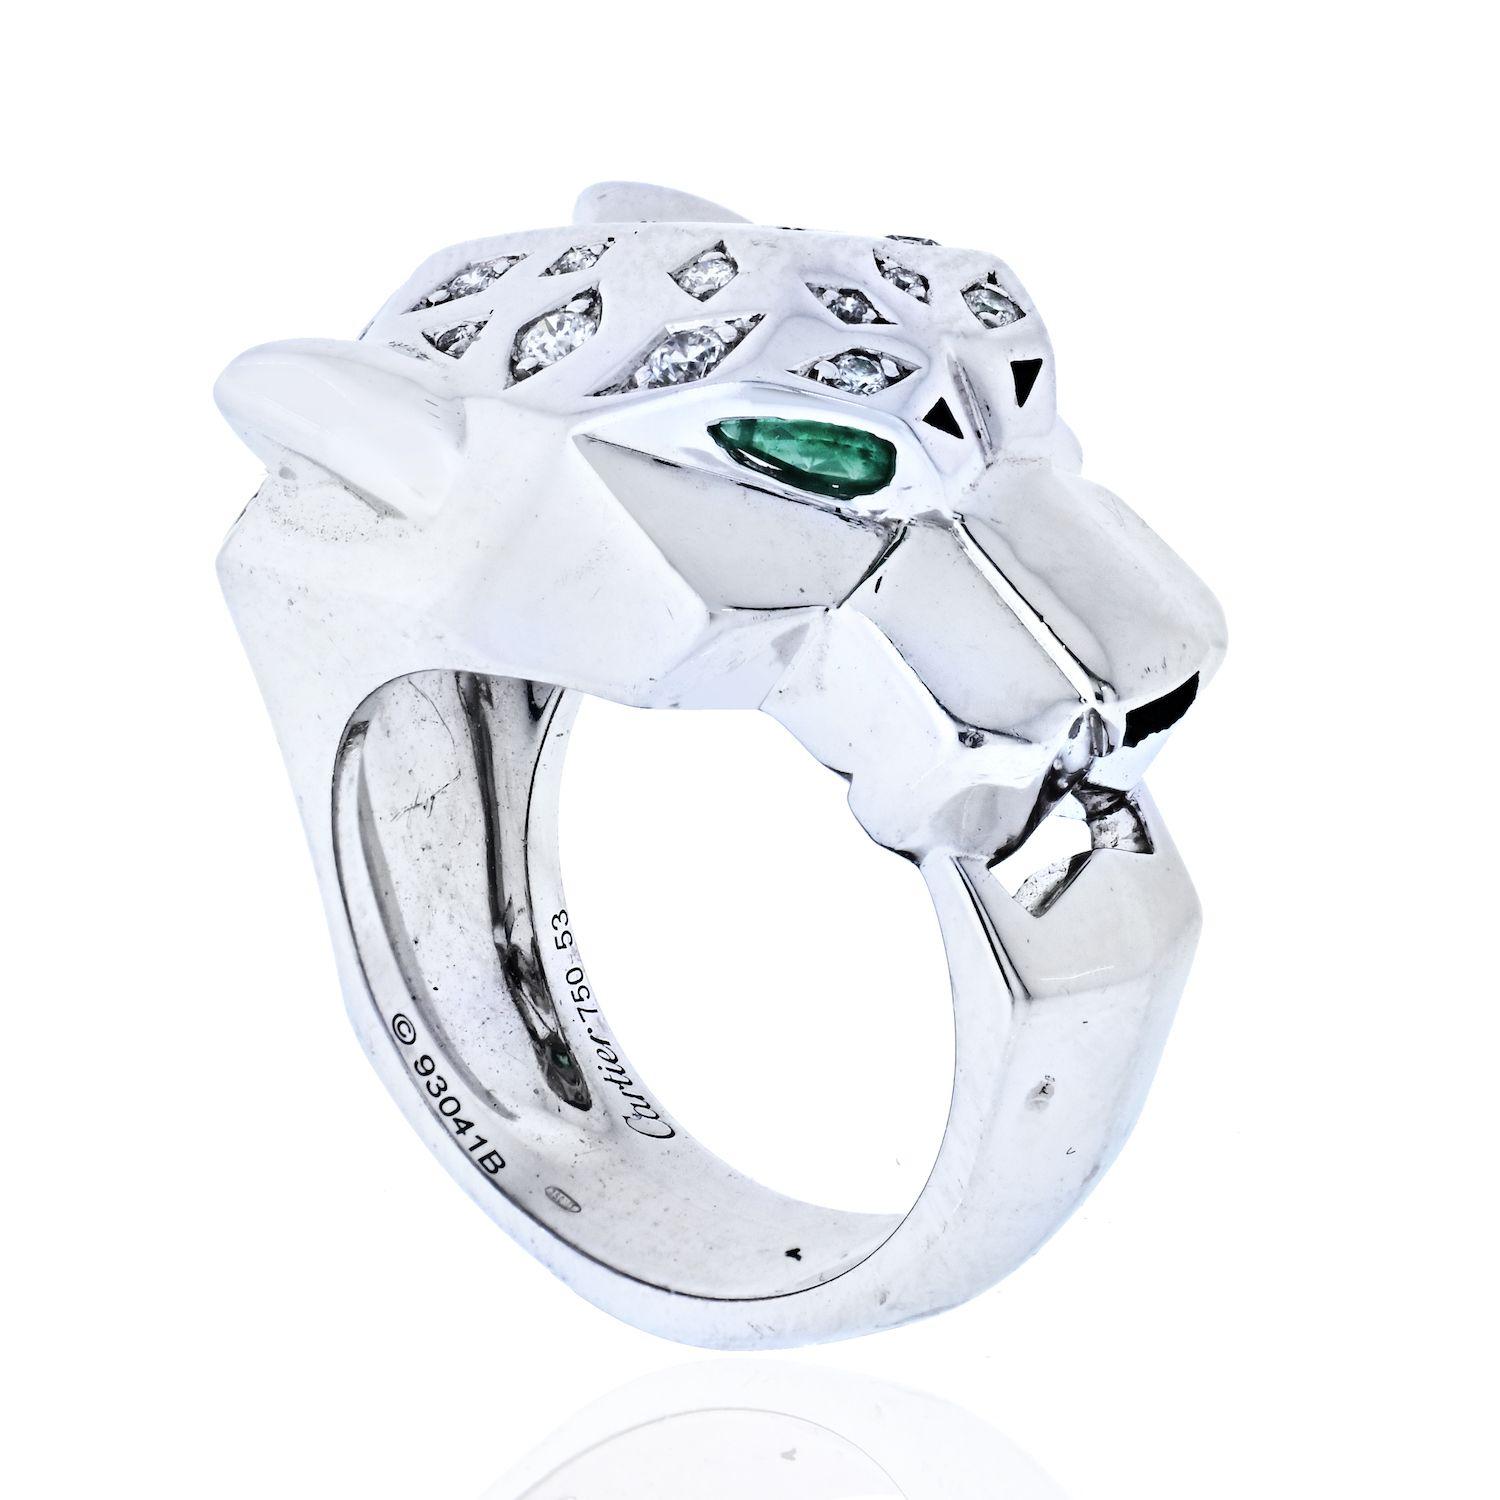 Modern Cartier 18K White Gold Panthere Diamond and Emerald Eyes Ring